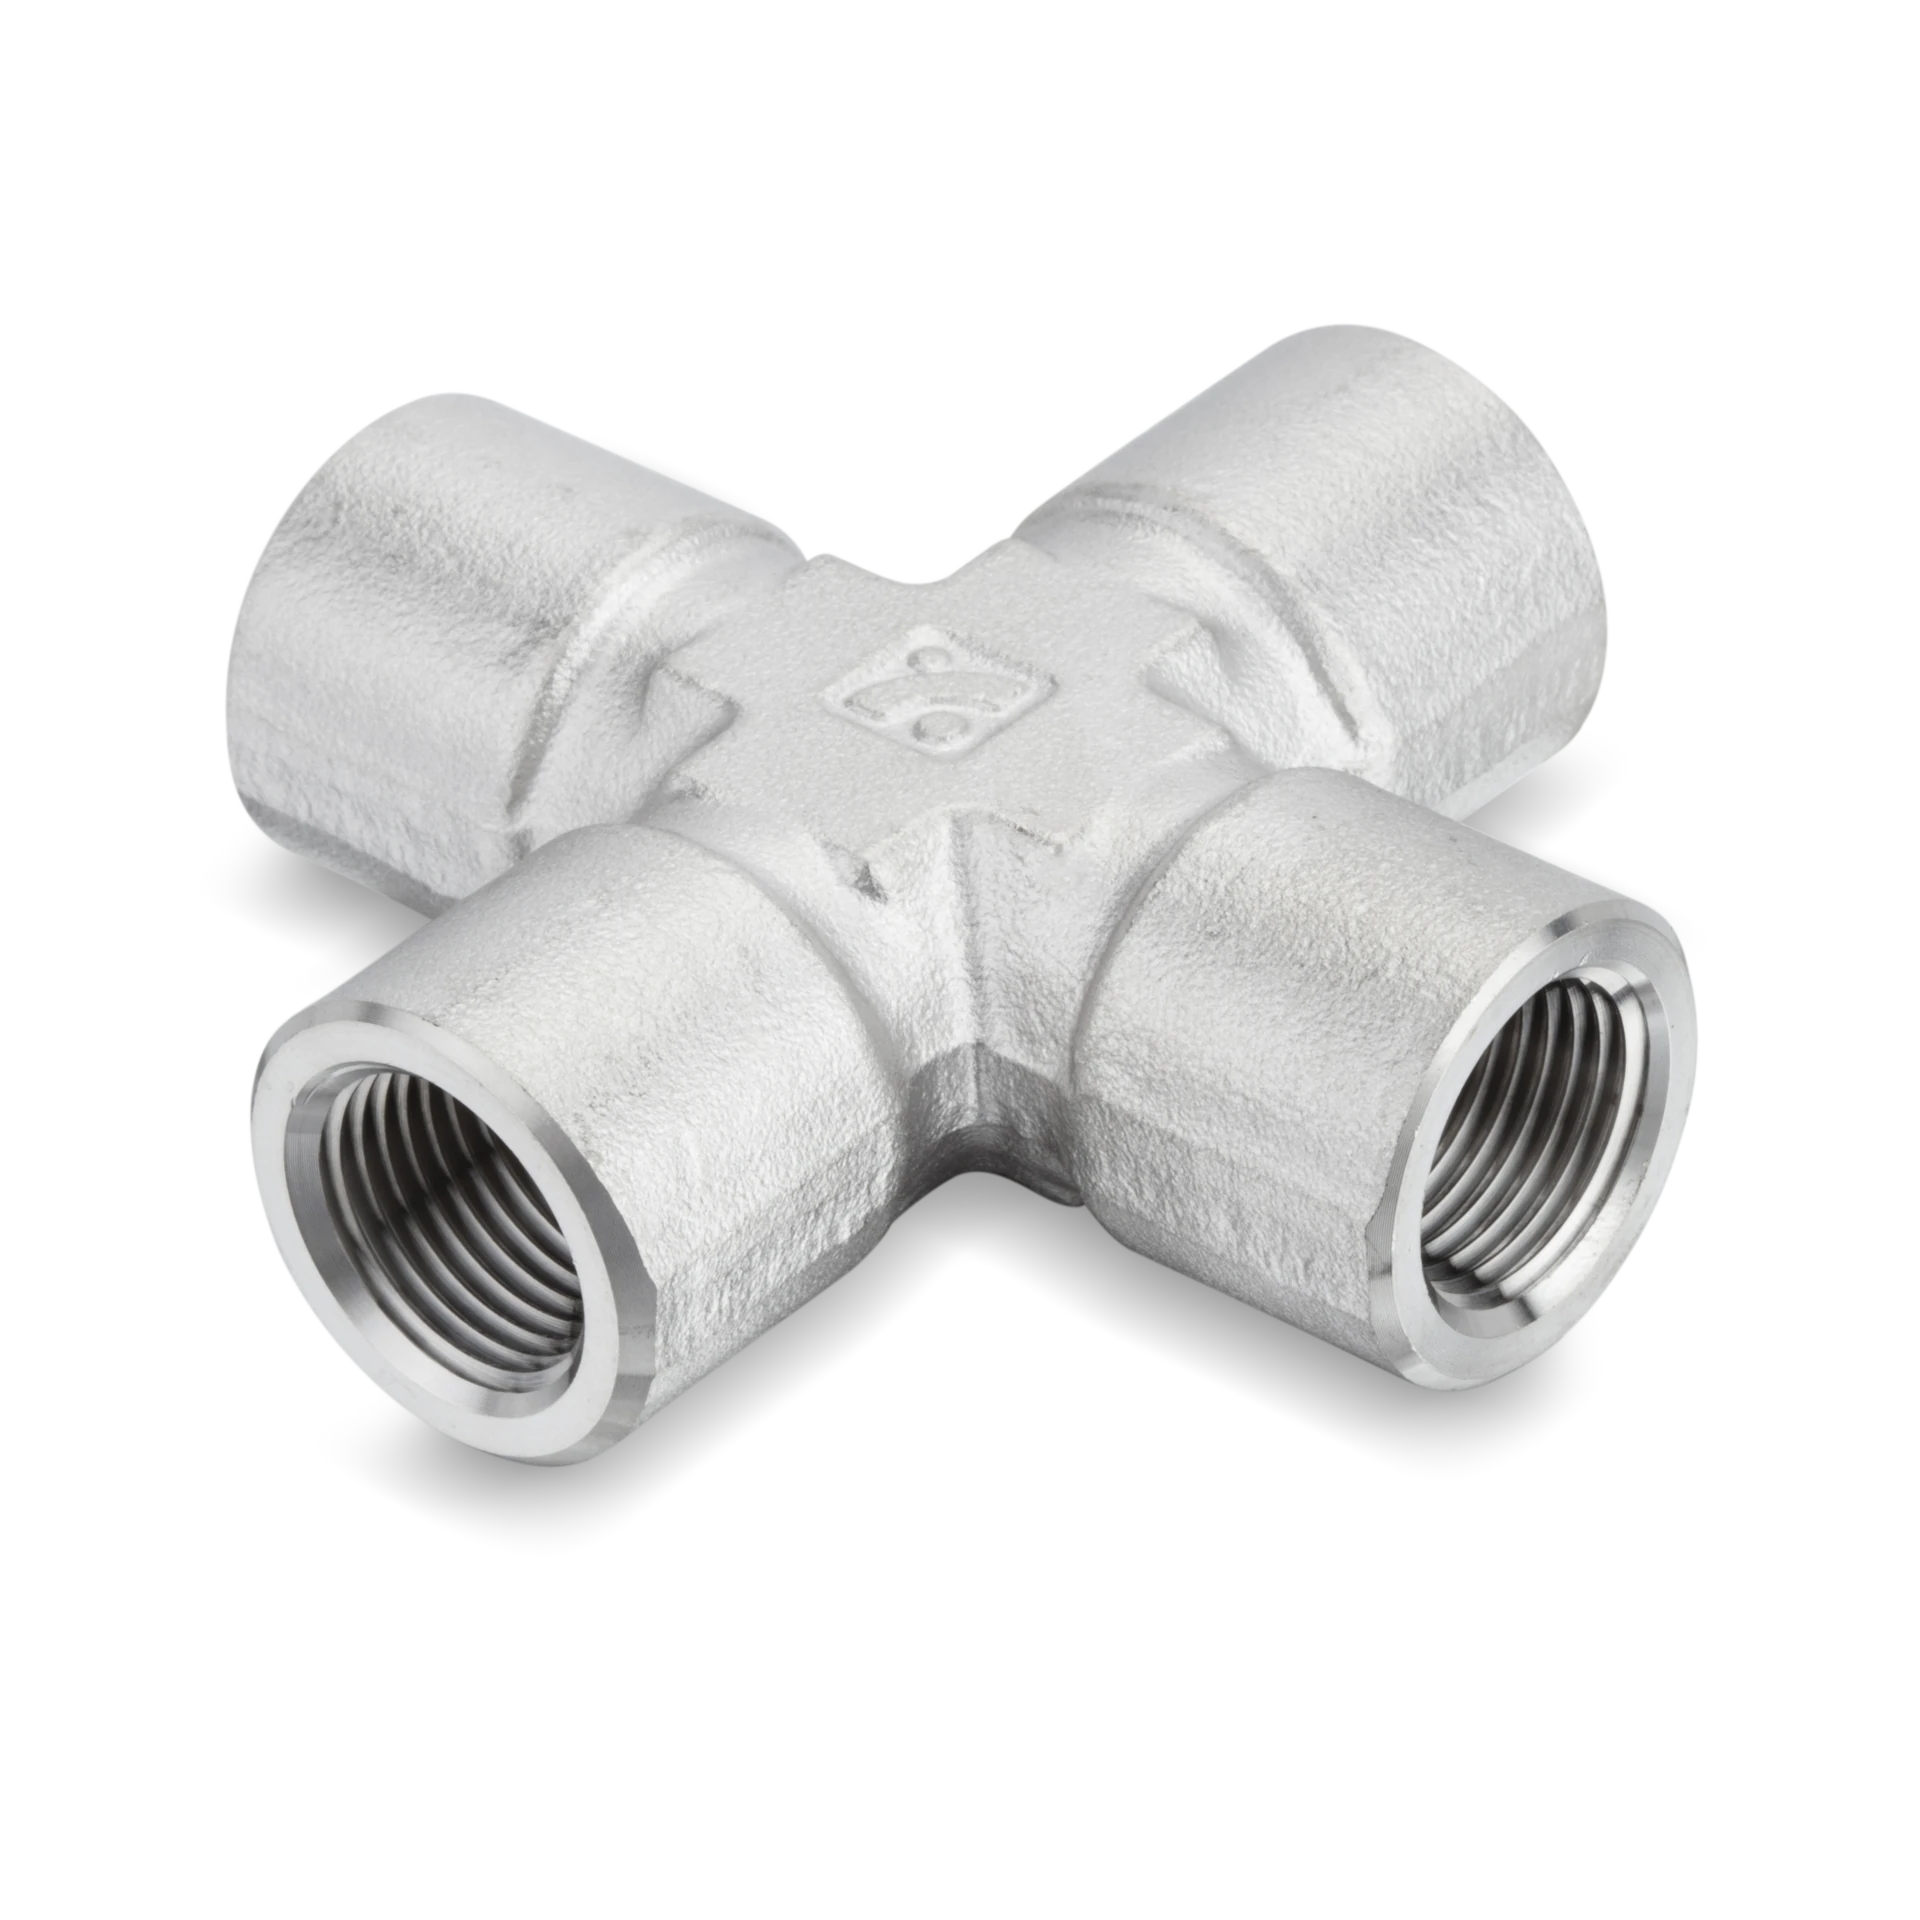 IFC PIPE FITTING